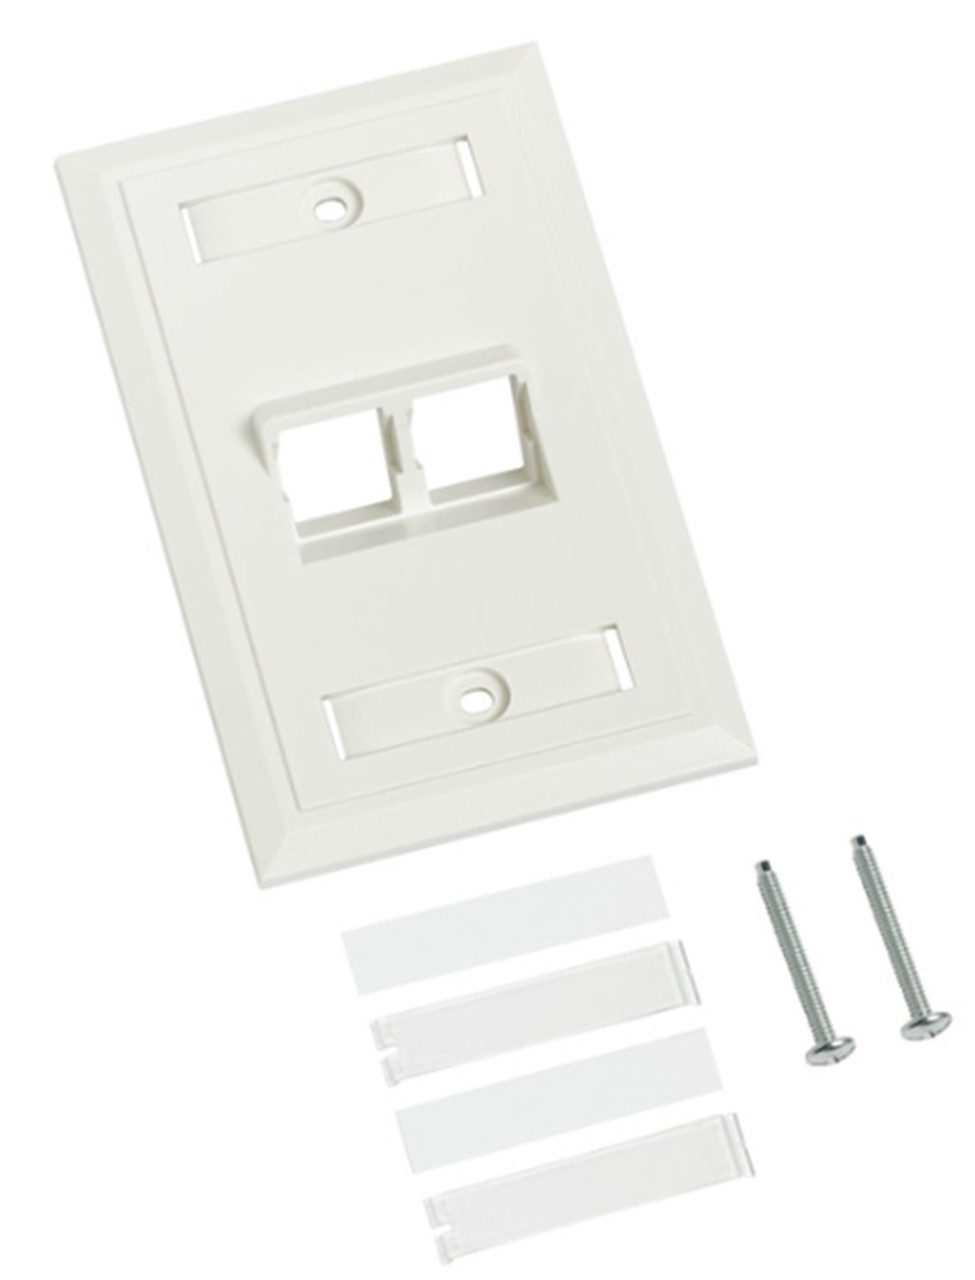 Commscope M12AS-262 107713562 Angled Specialty Faceplate, White Finish [New]